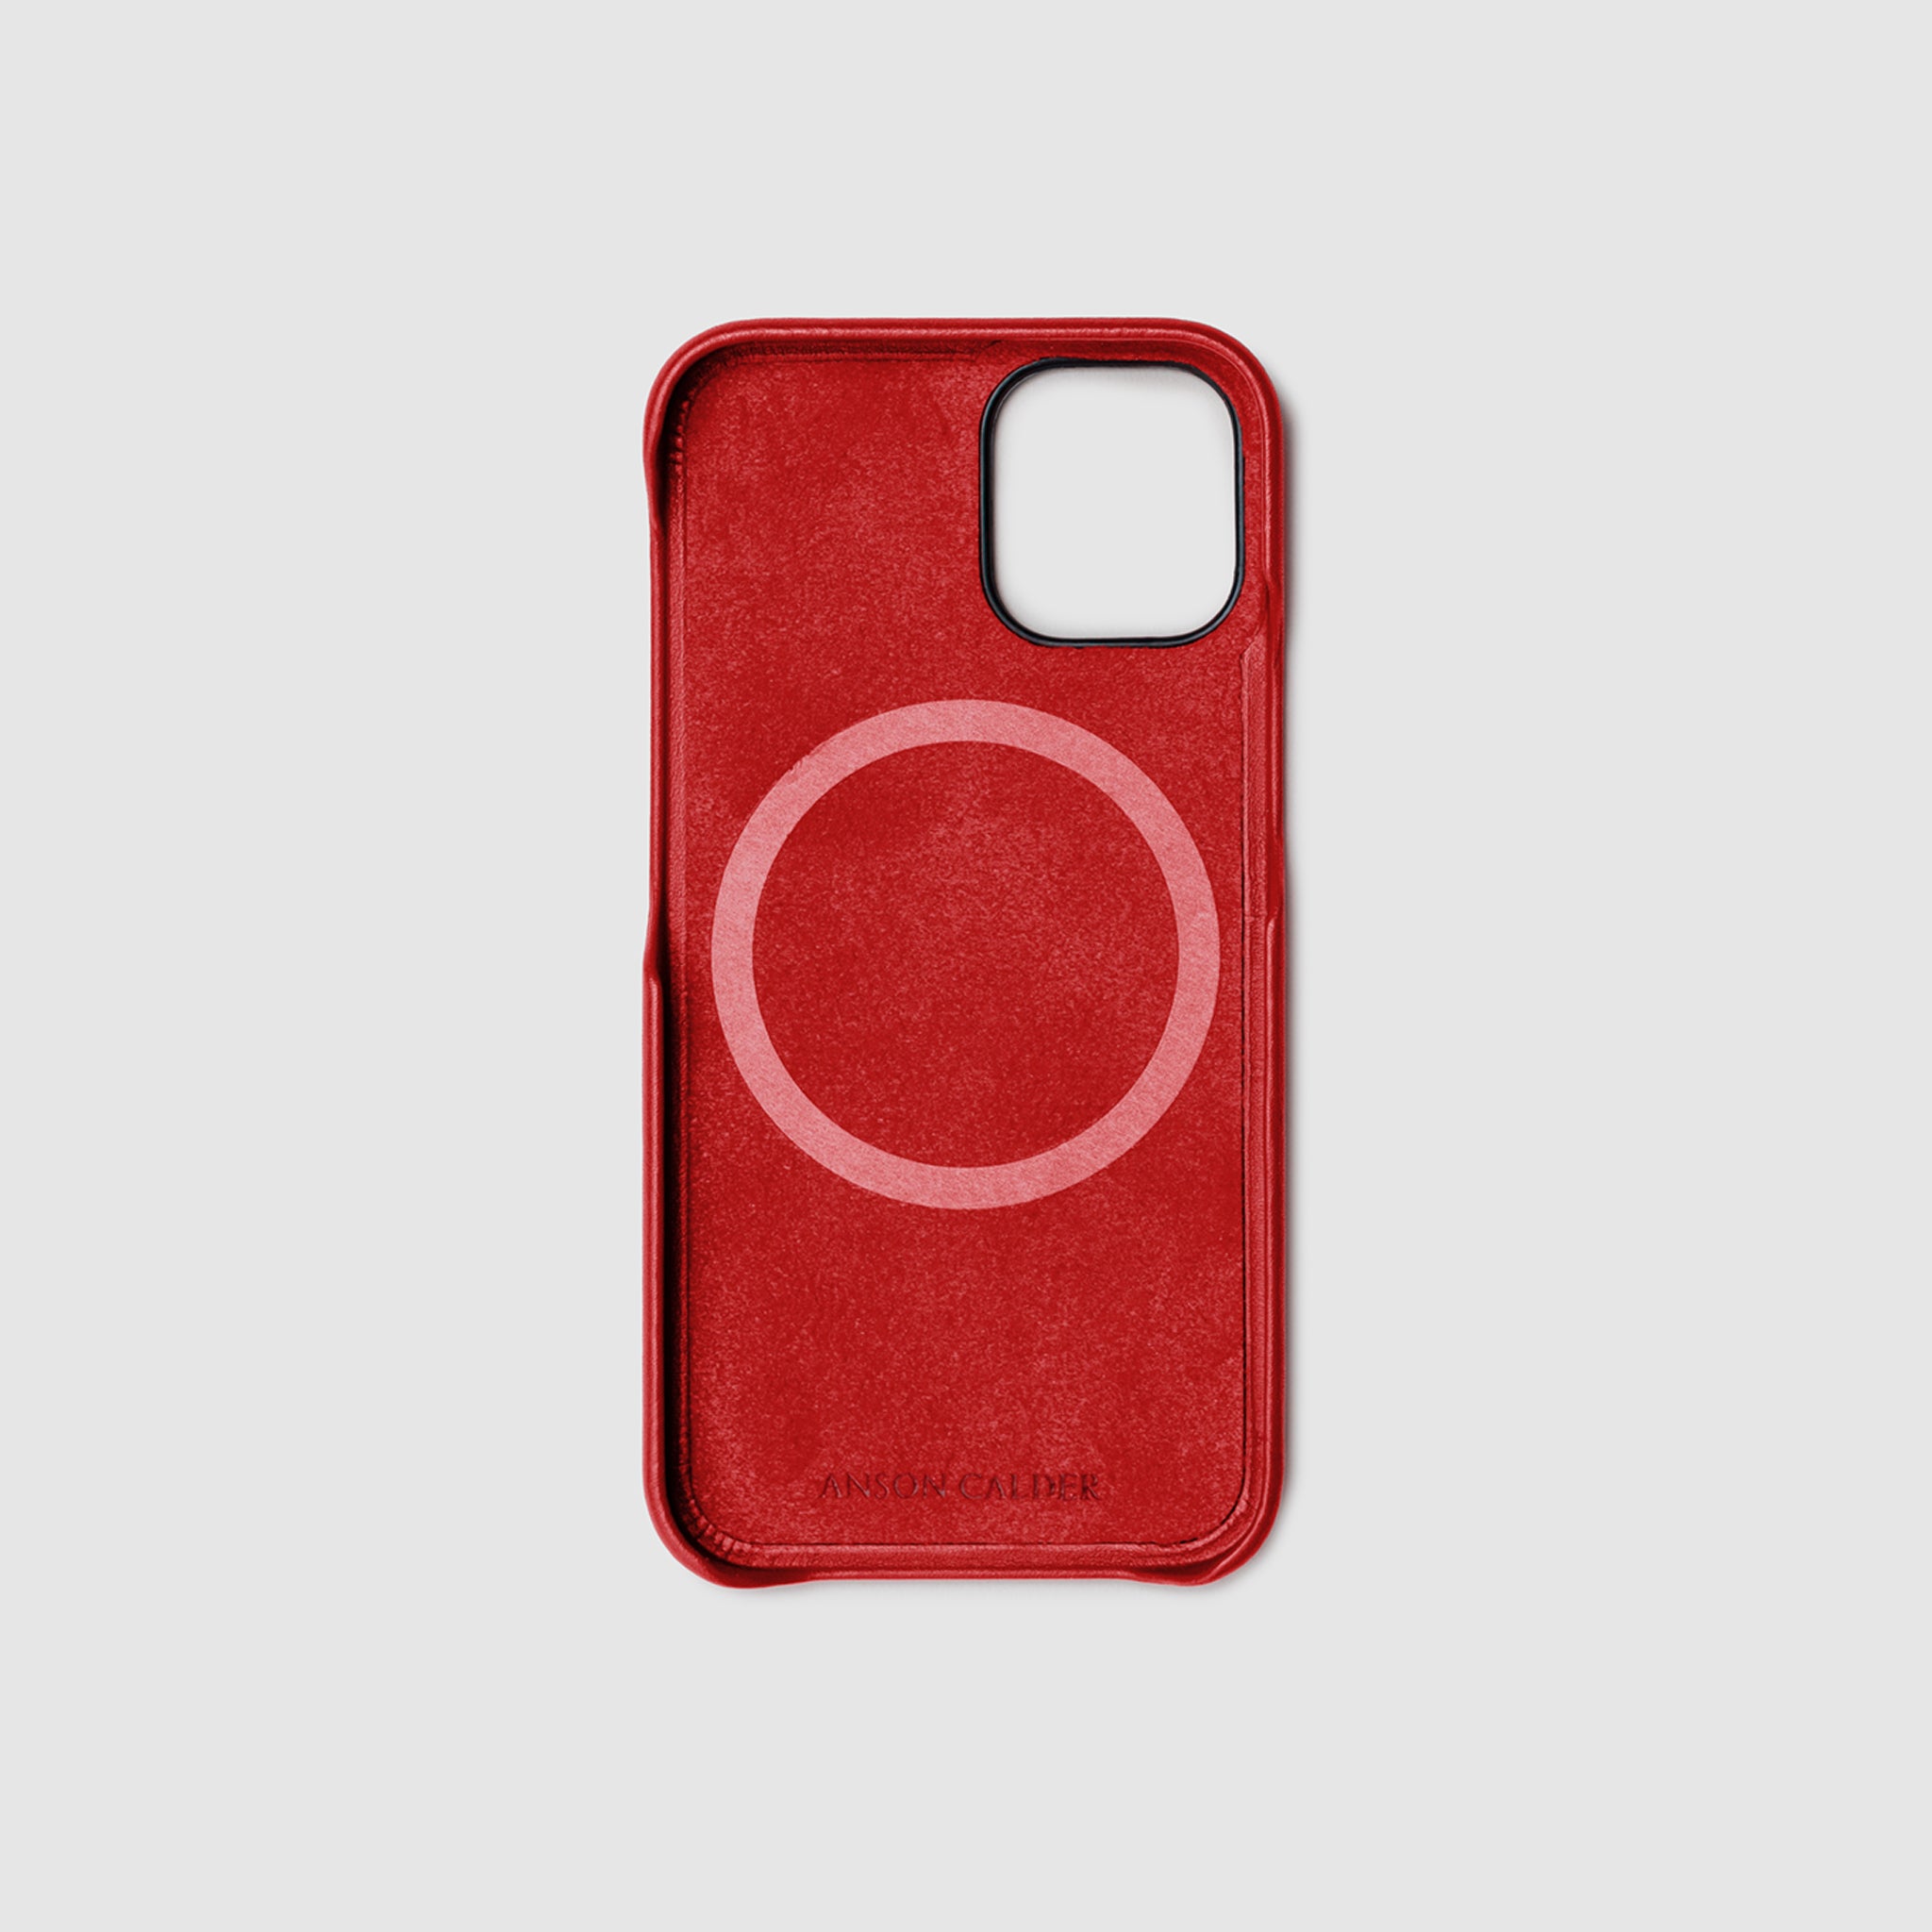 anson calder iphone case french calfskin 12 twelve pro max leather _red